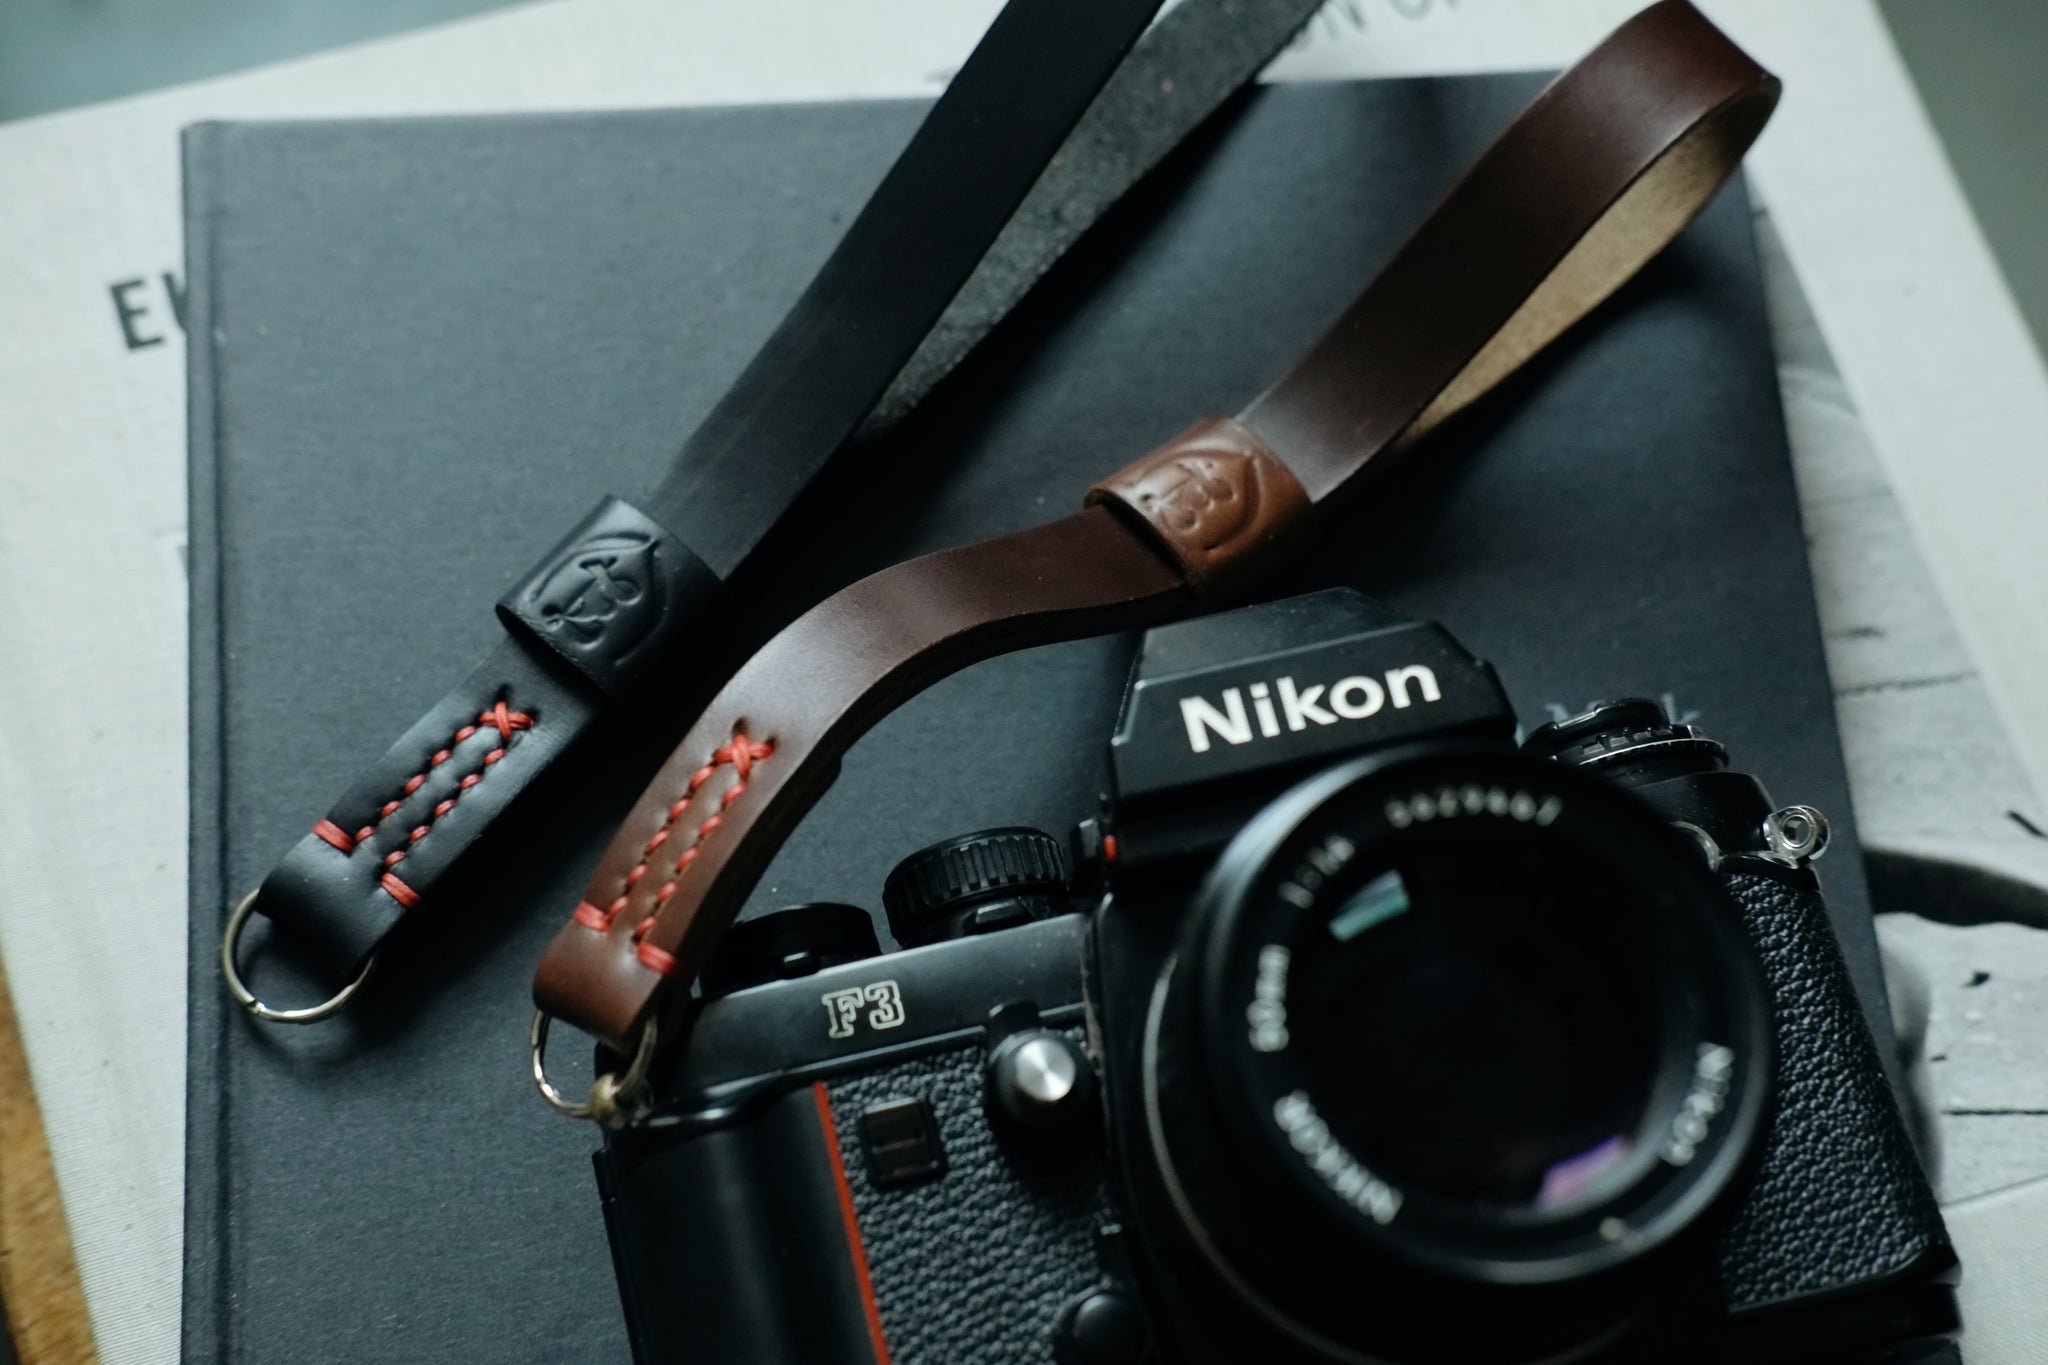 LEGACY leather camera wrist strap - Horween Chromexcel | Hand stitched